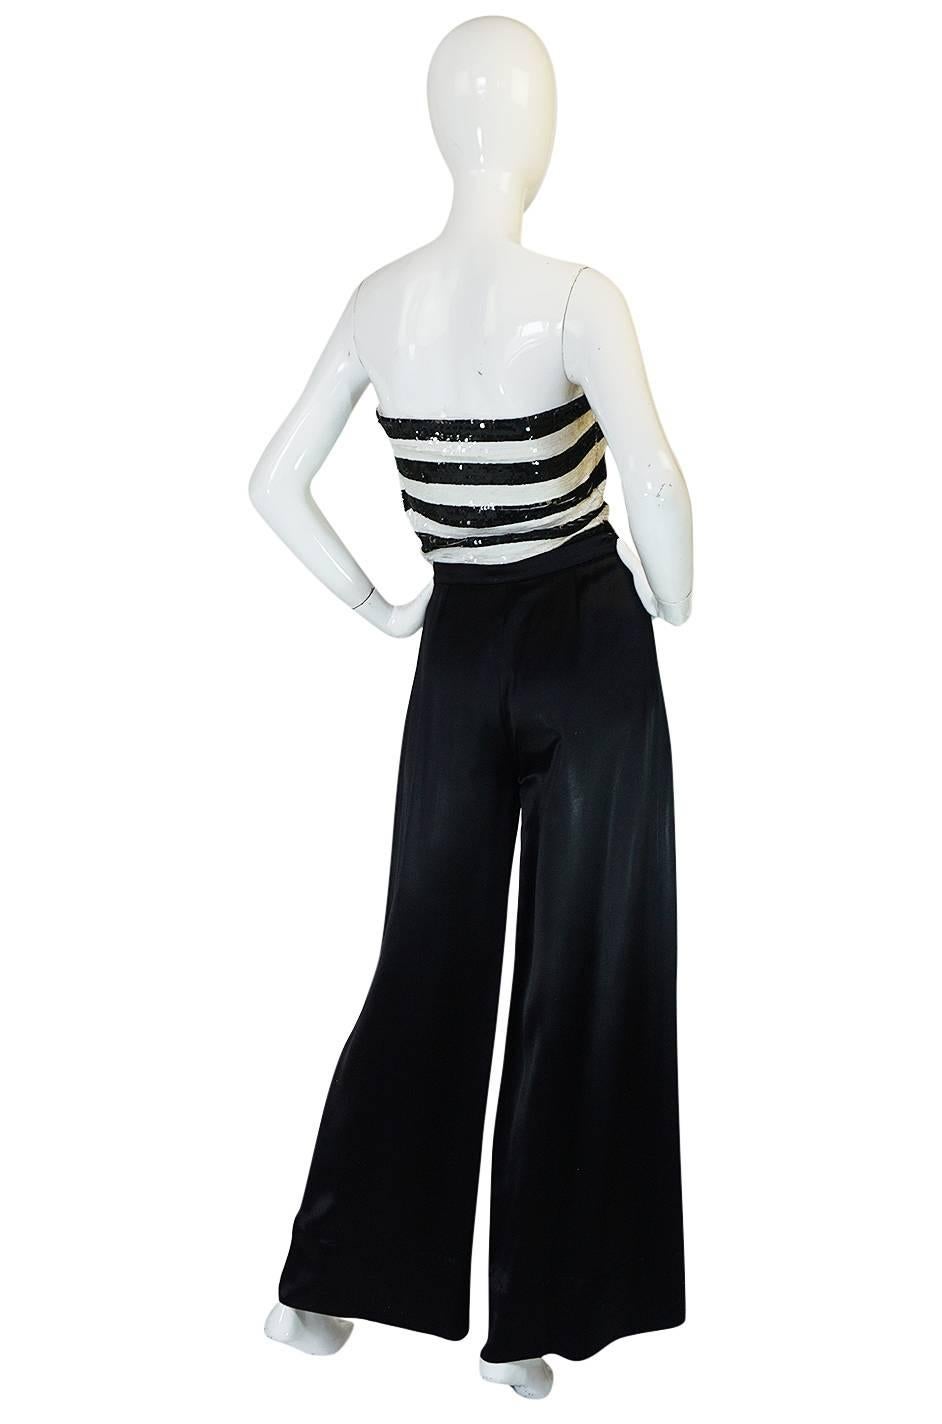 Yves Saint Laurent was the master of making simple pieces into something luxurious and fine and here we have a fabulous example that is the very definition of that aesthetic. The 1966 Haute Couture collection featured sequin striped pieces and this